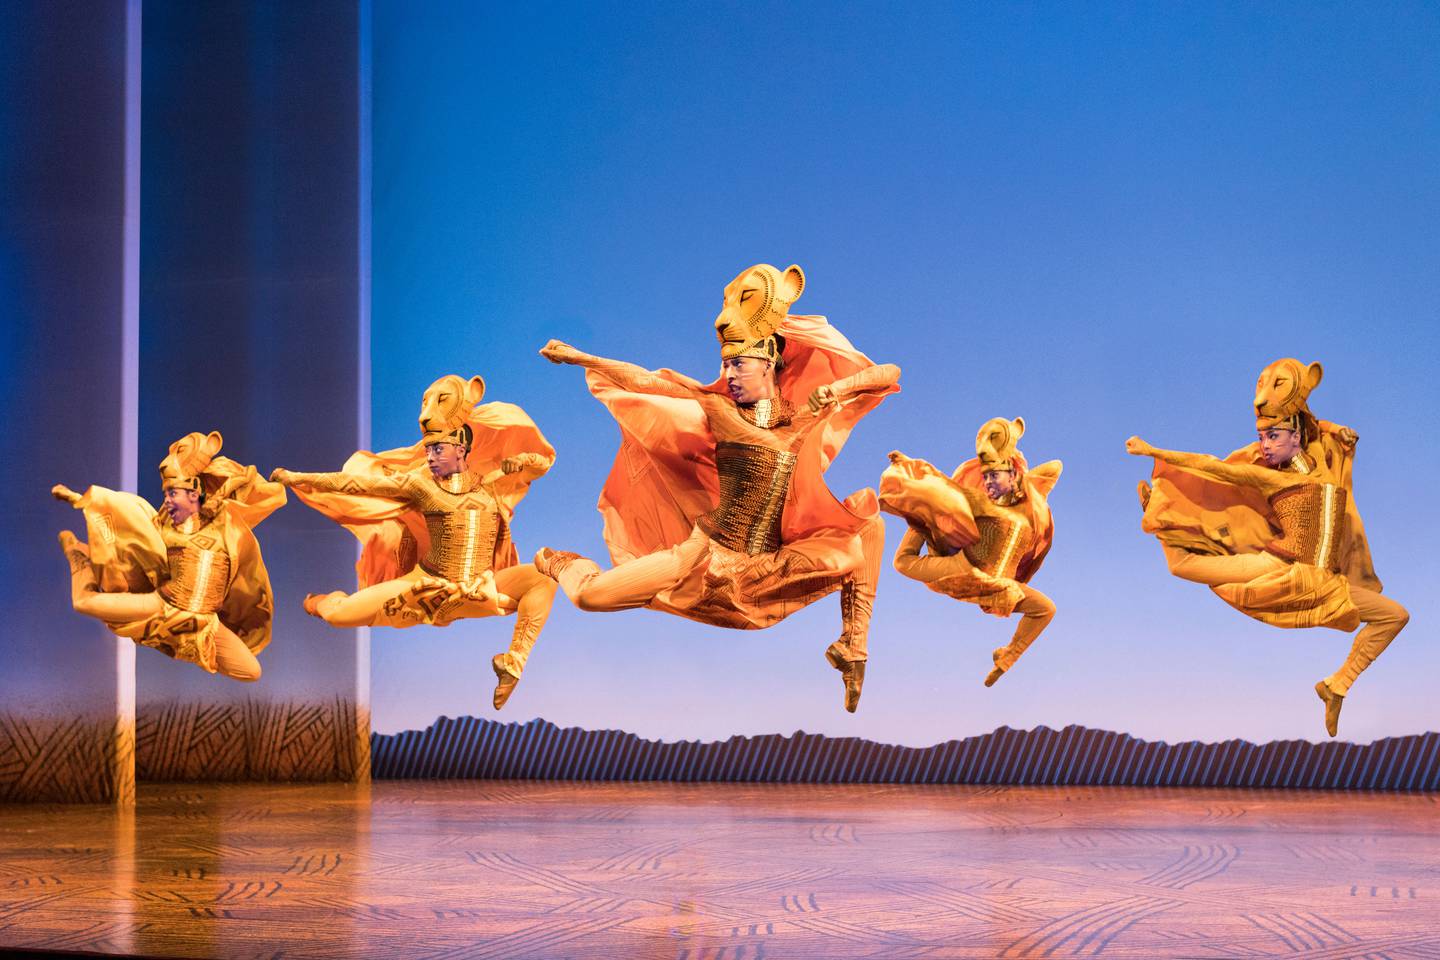 Lionesses Dance in "The Lion King"